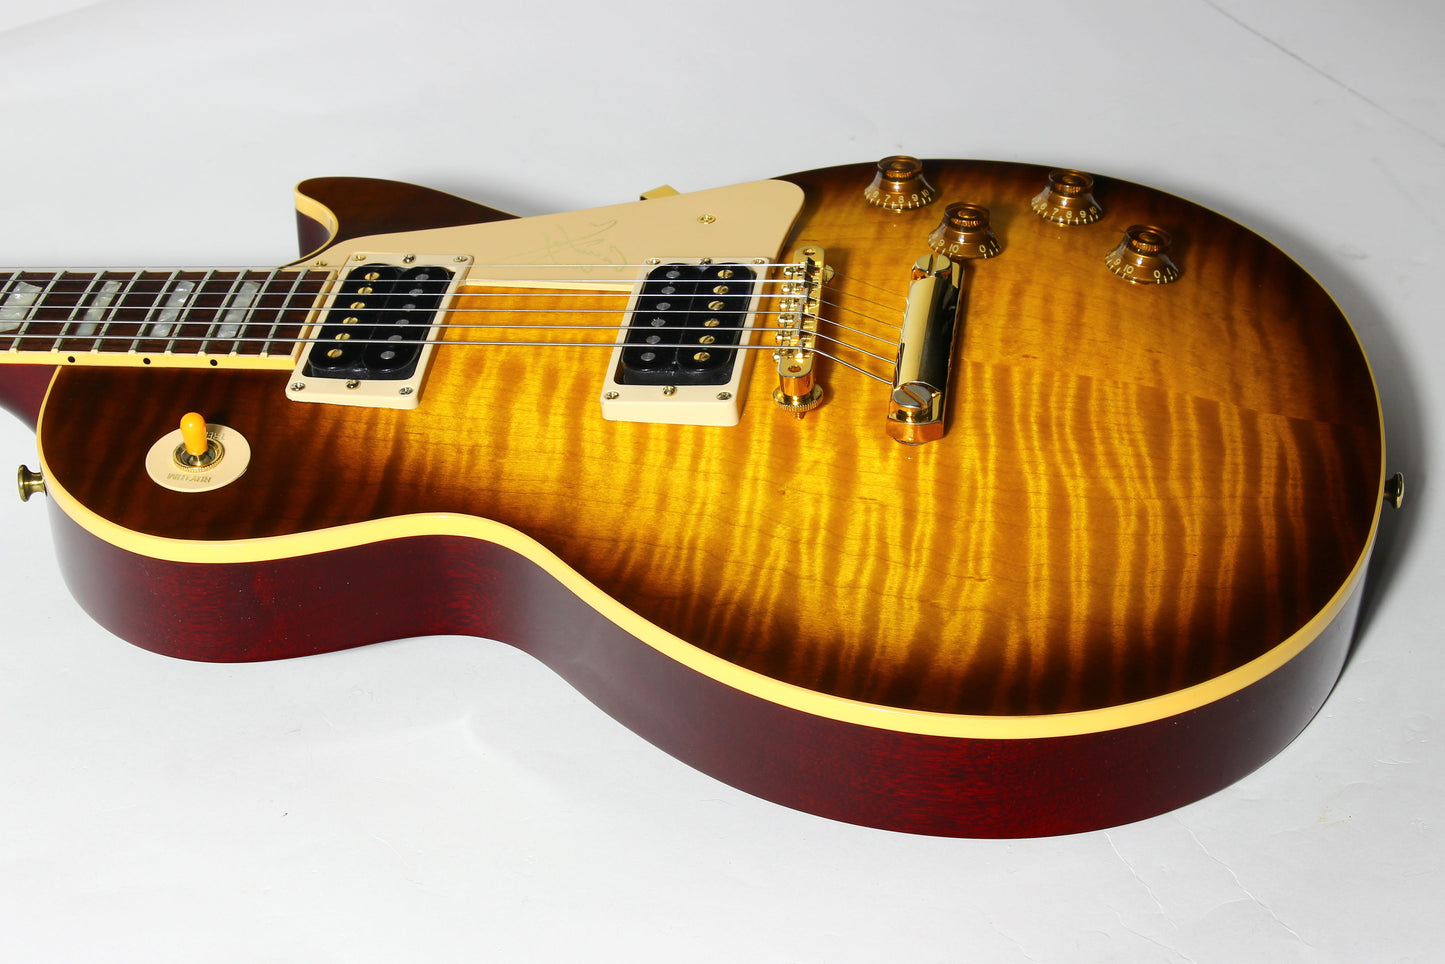 1995 Gibson Jimmy Page Les Paul Standard Signature 1959 Model - Iced Tea Plus Flametop Classic